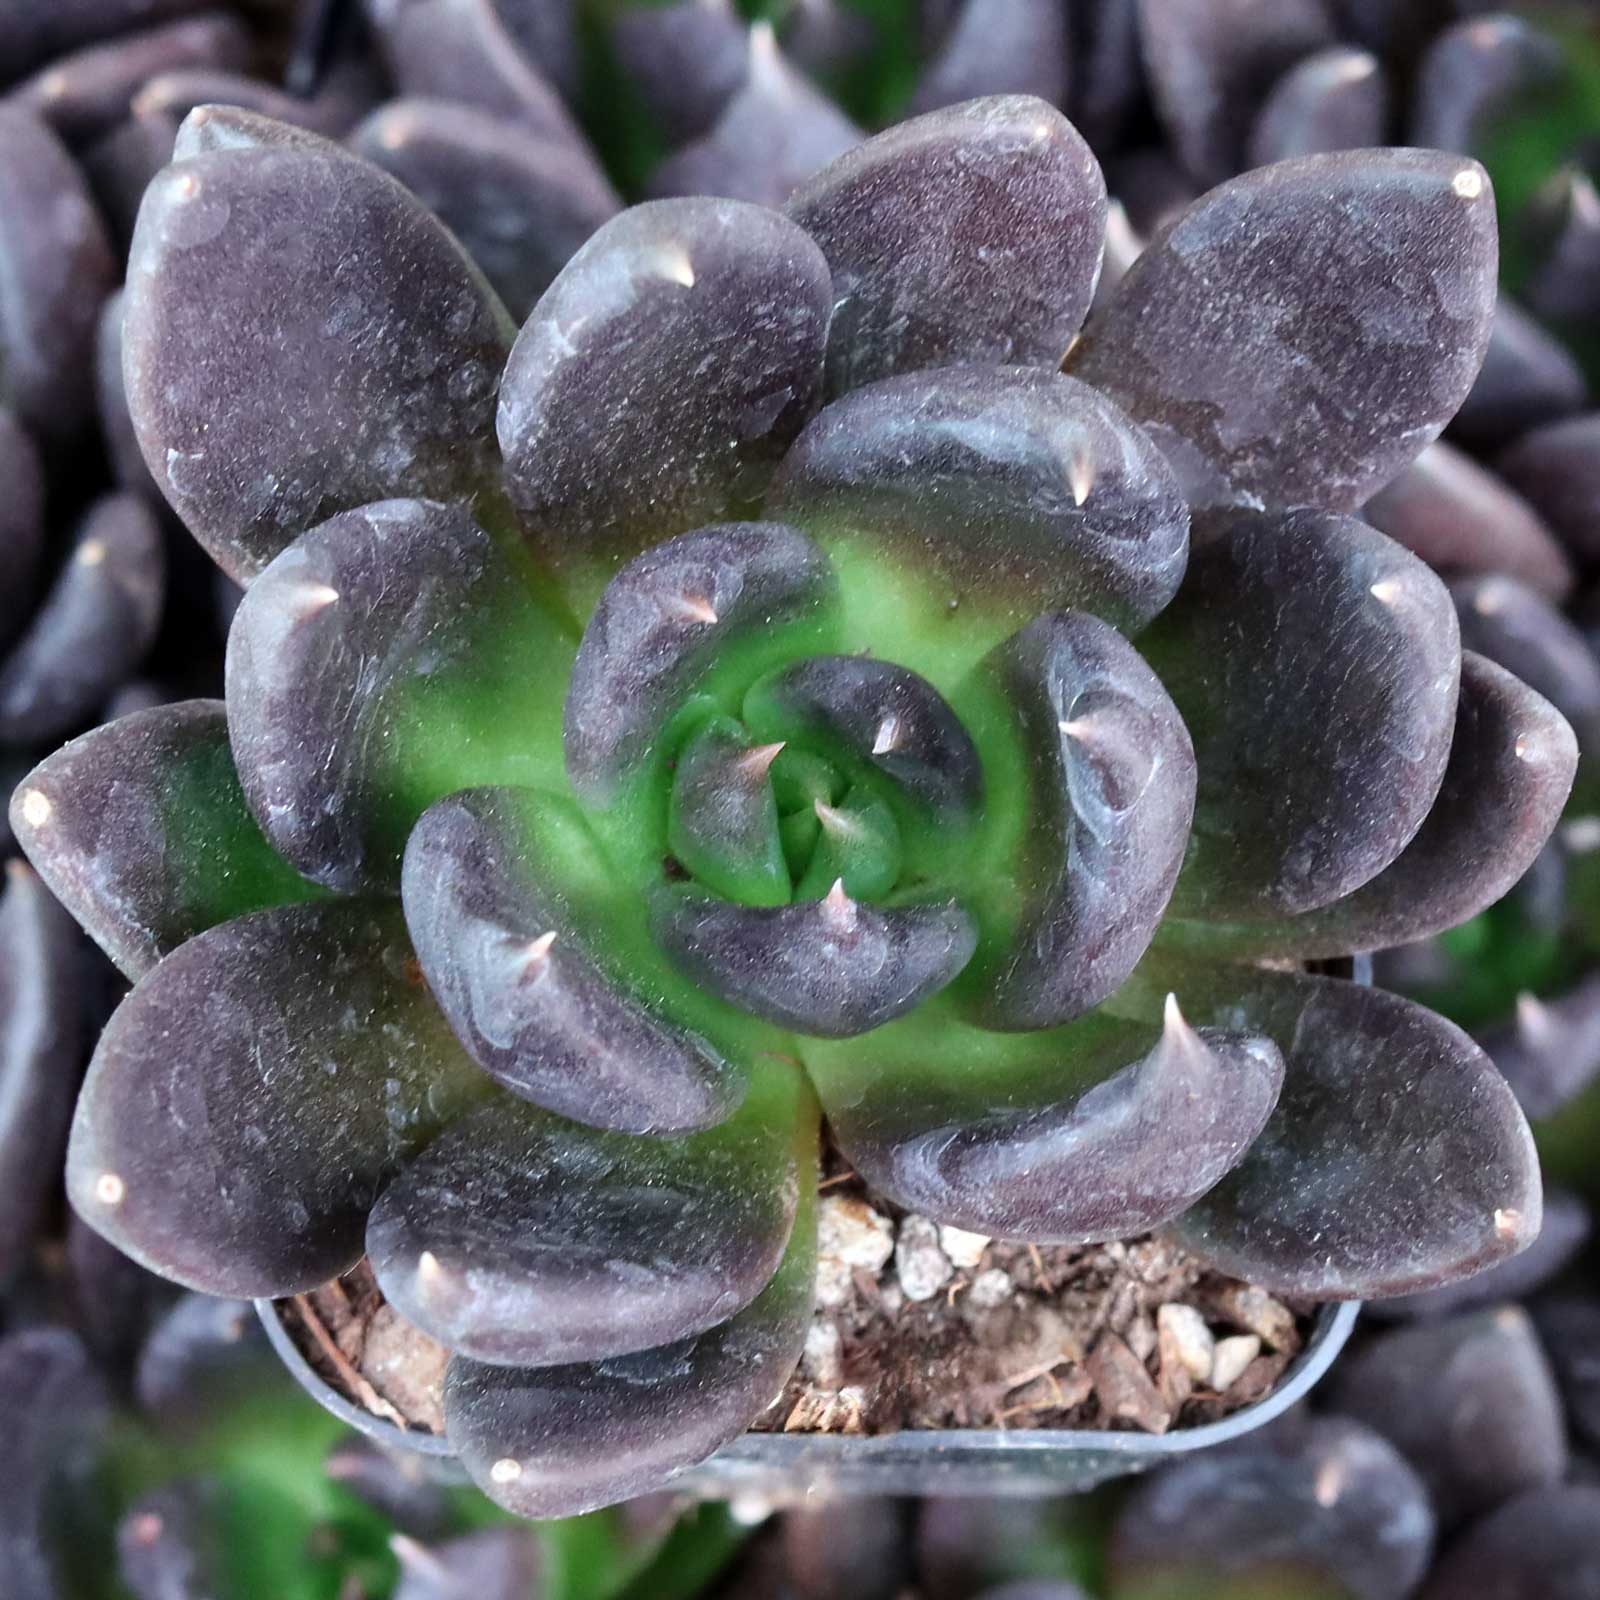 are there any succulents that can tolerate rain?